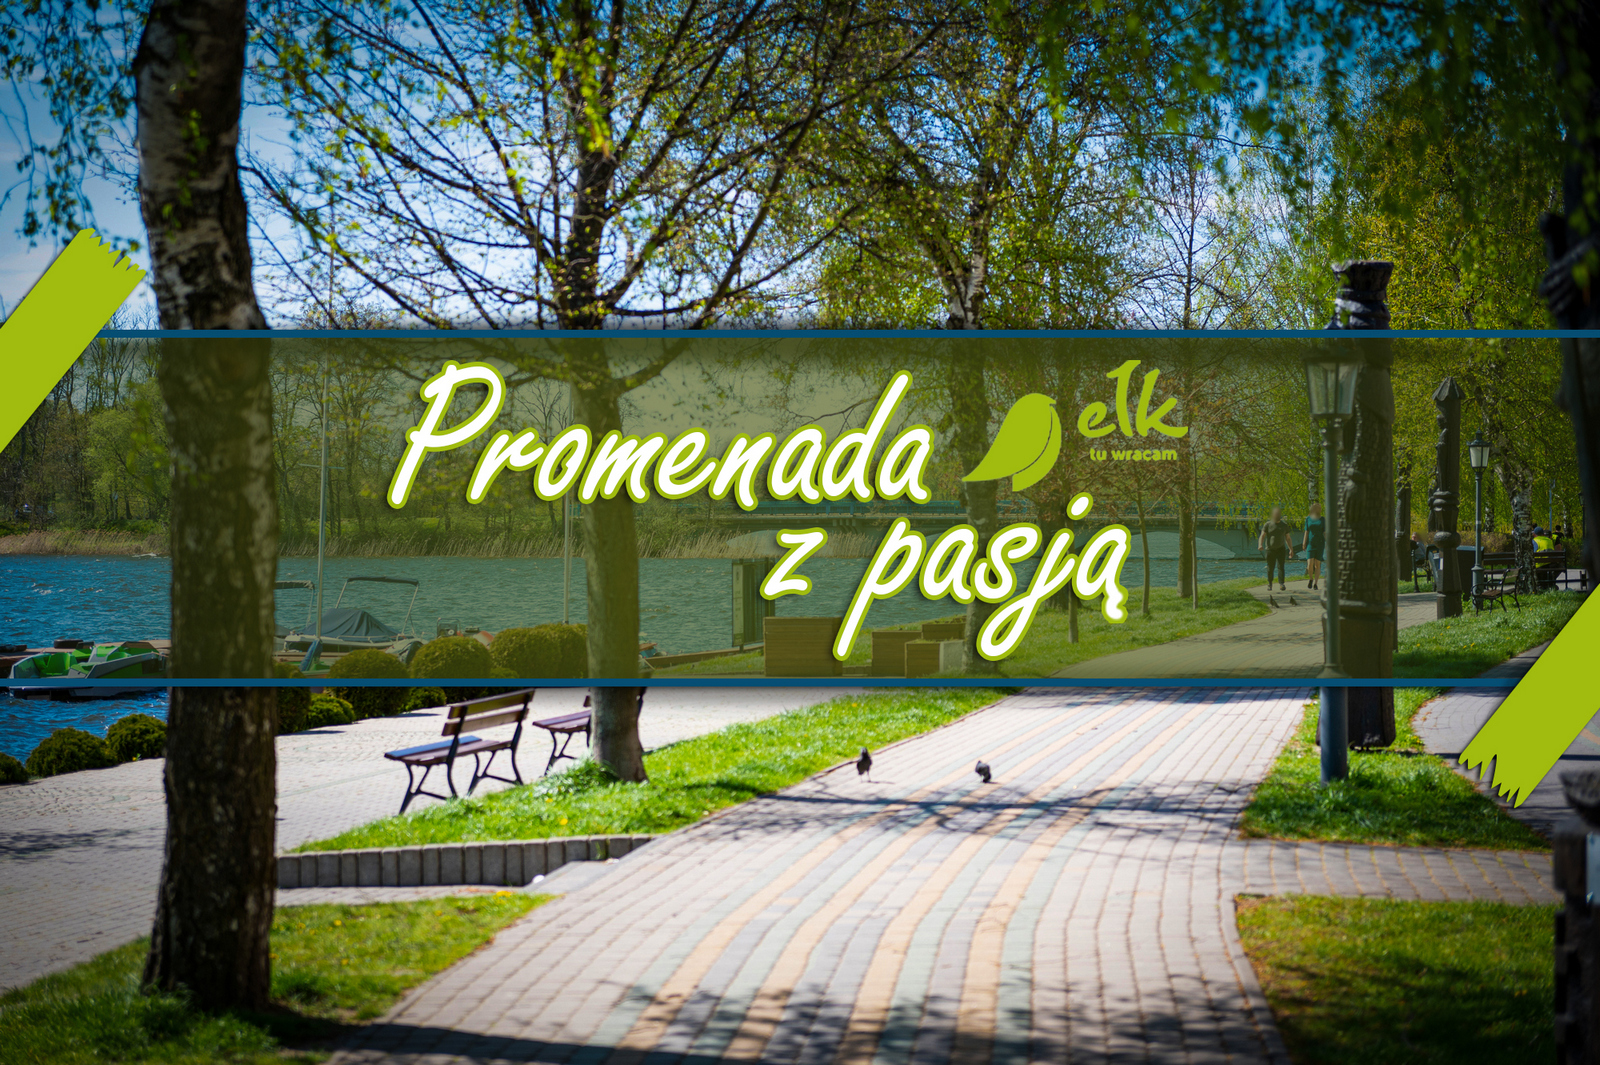 "Promenade with passion" - artists and creators of culture can present themselves on the Ełk promenade